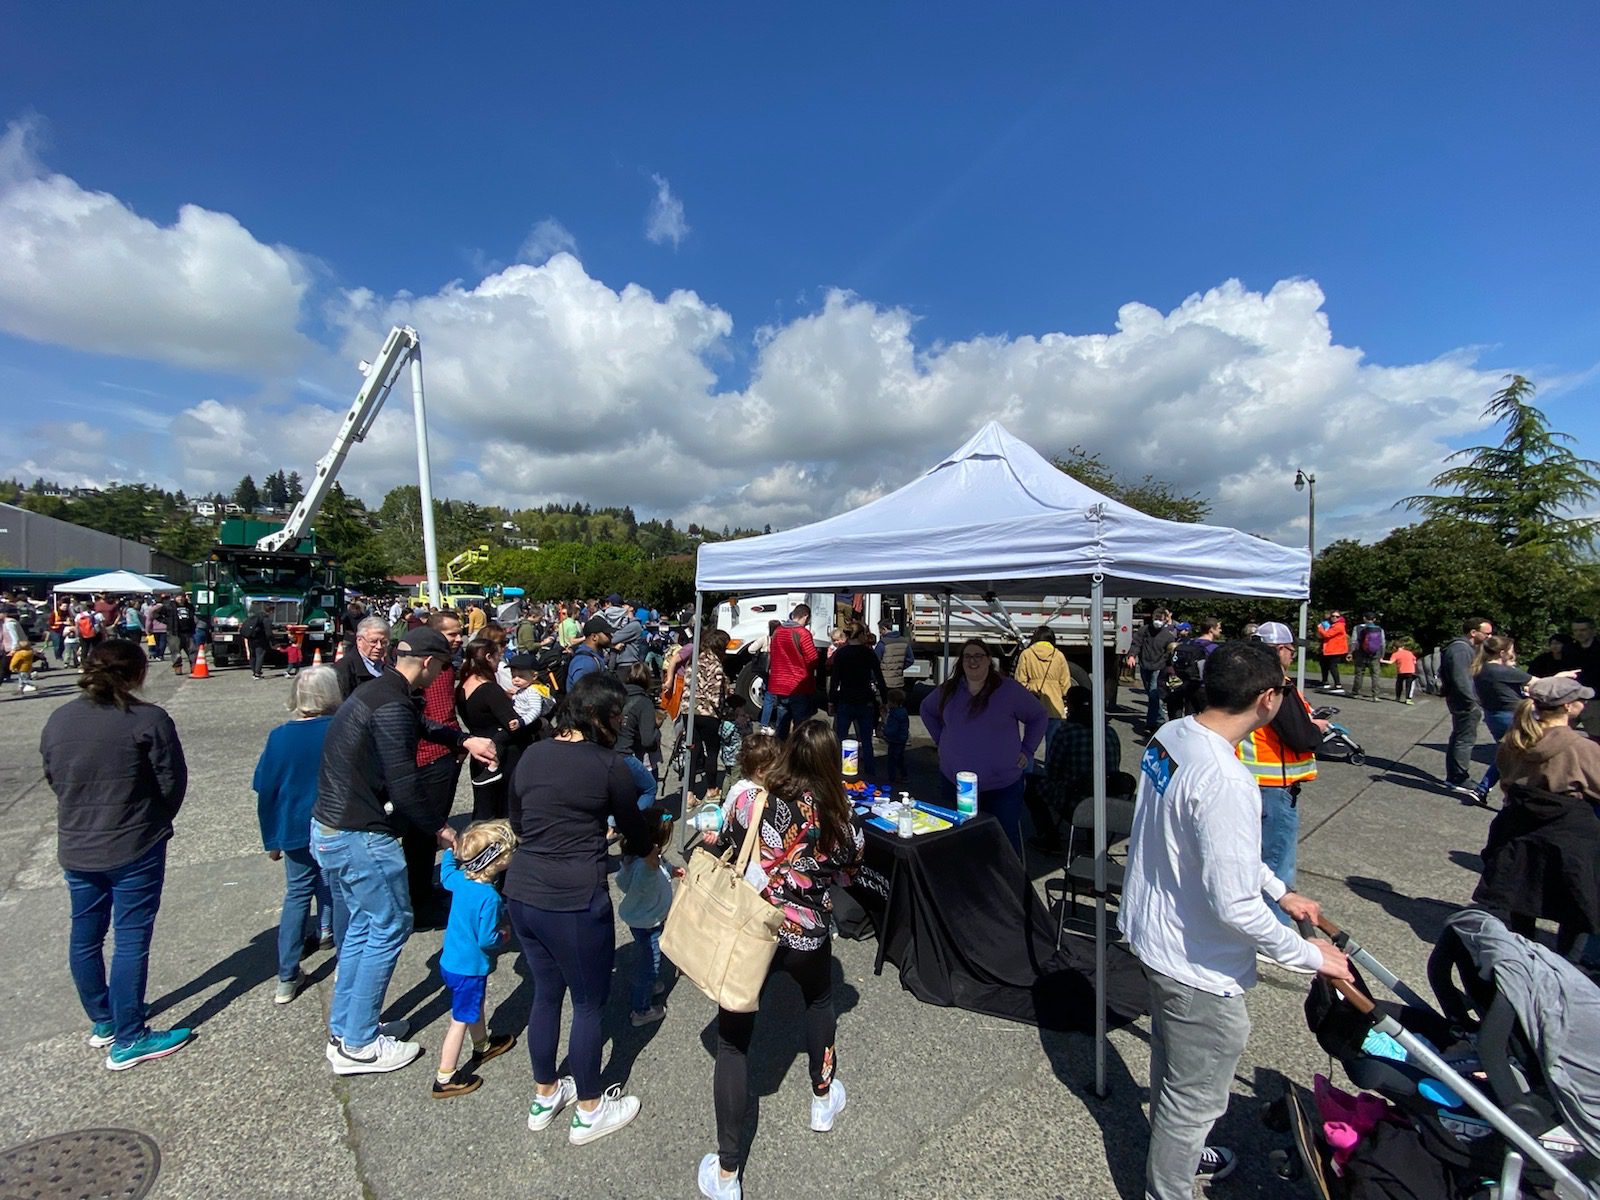 SDOT’s customer service team answers questions from interested community members of all ages at the event, which took place on a clear, sunny day in Seattle.